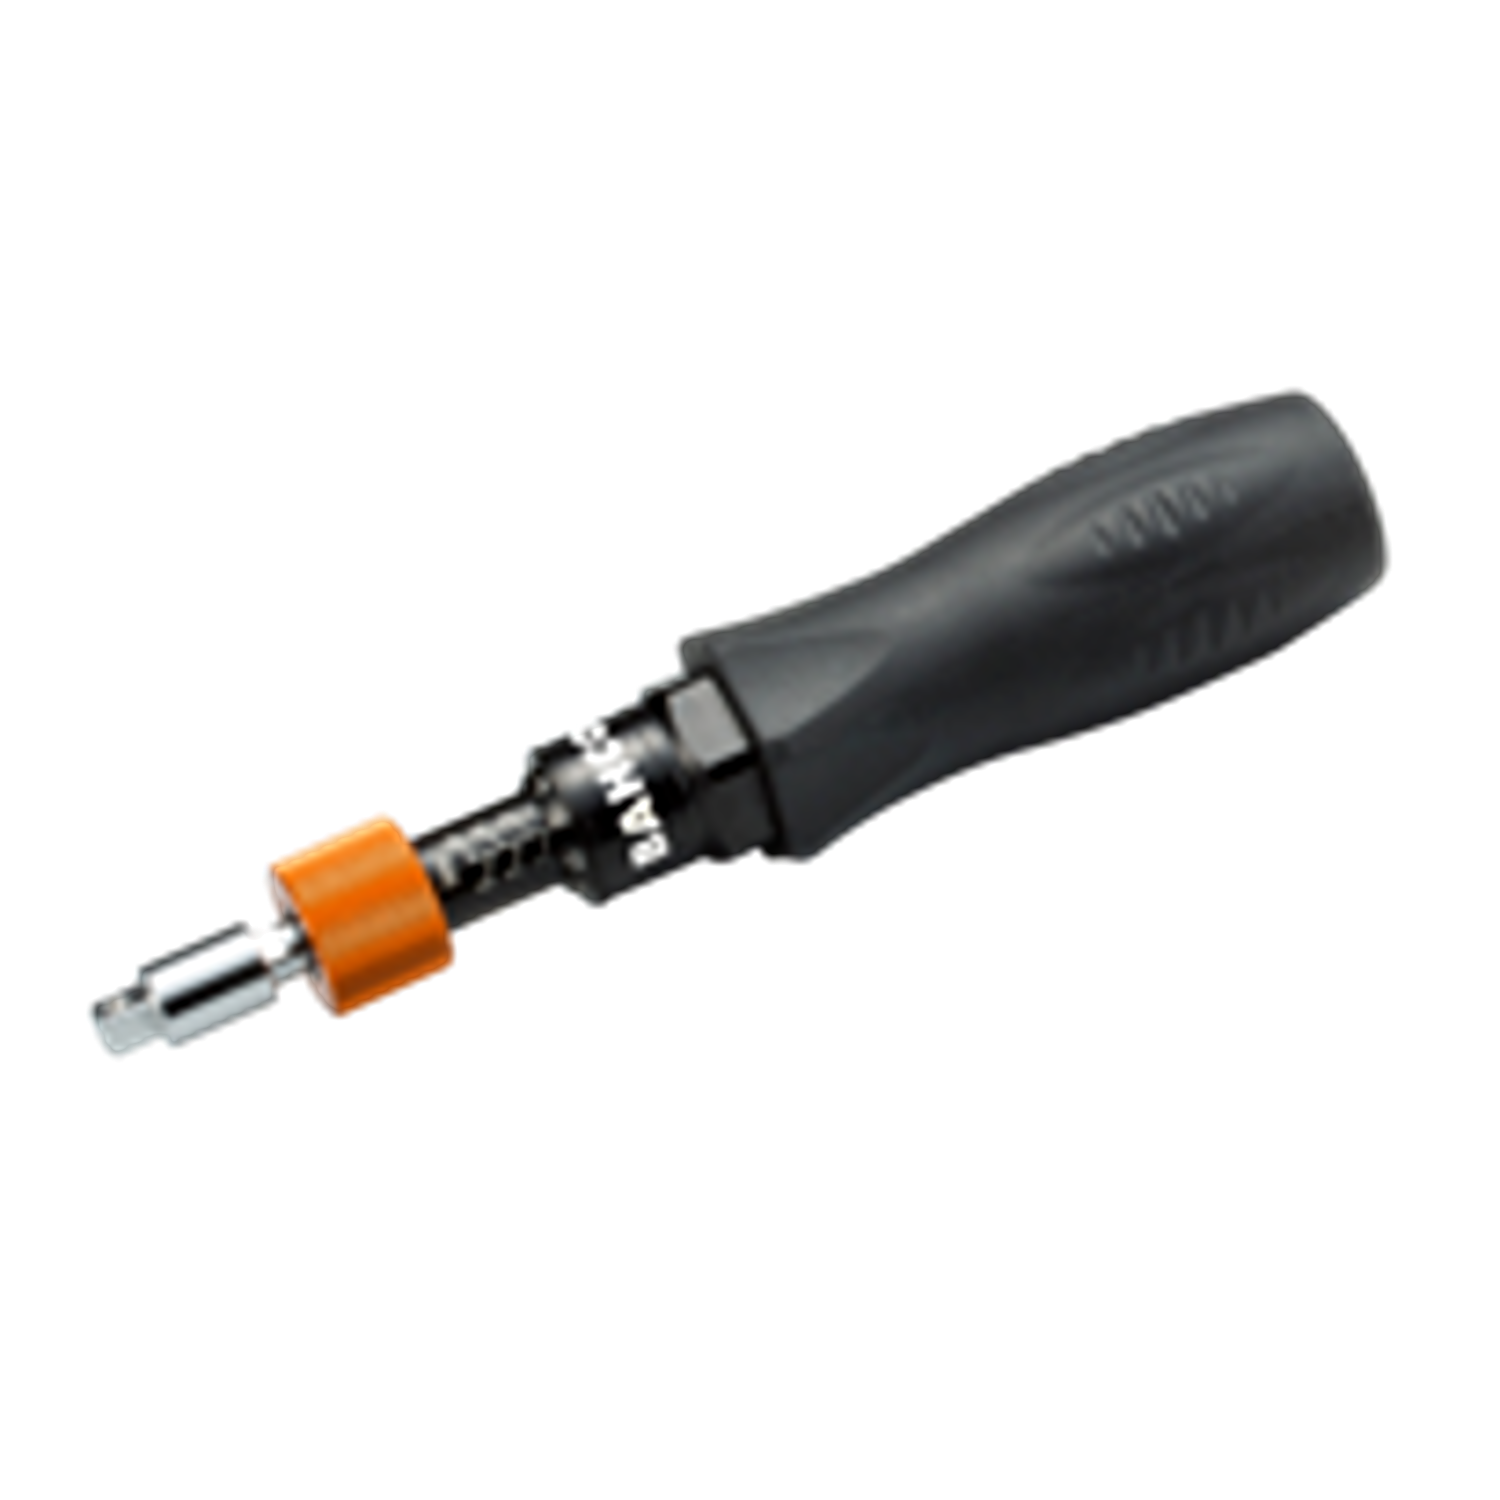 BAHCO BT15P5 1/2” Impact Socket And Bit Set (BAHCO Tools) - Premium 1/2” Impact Socket from BAHCO - Shop now at Yew Aik.